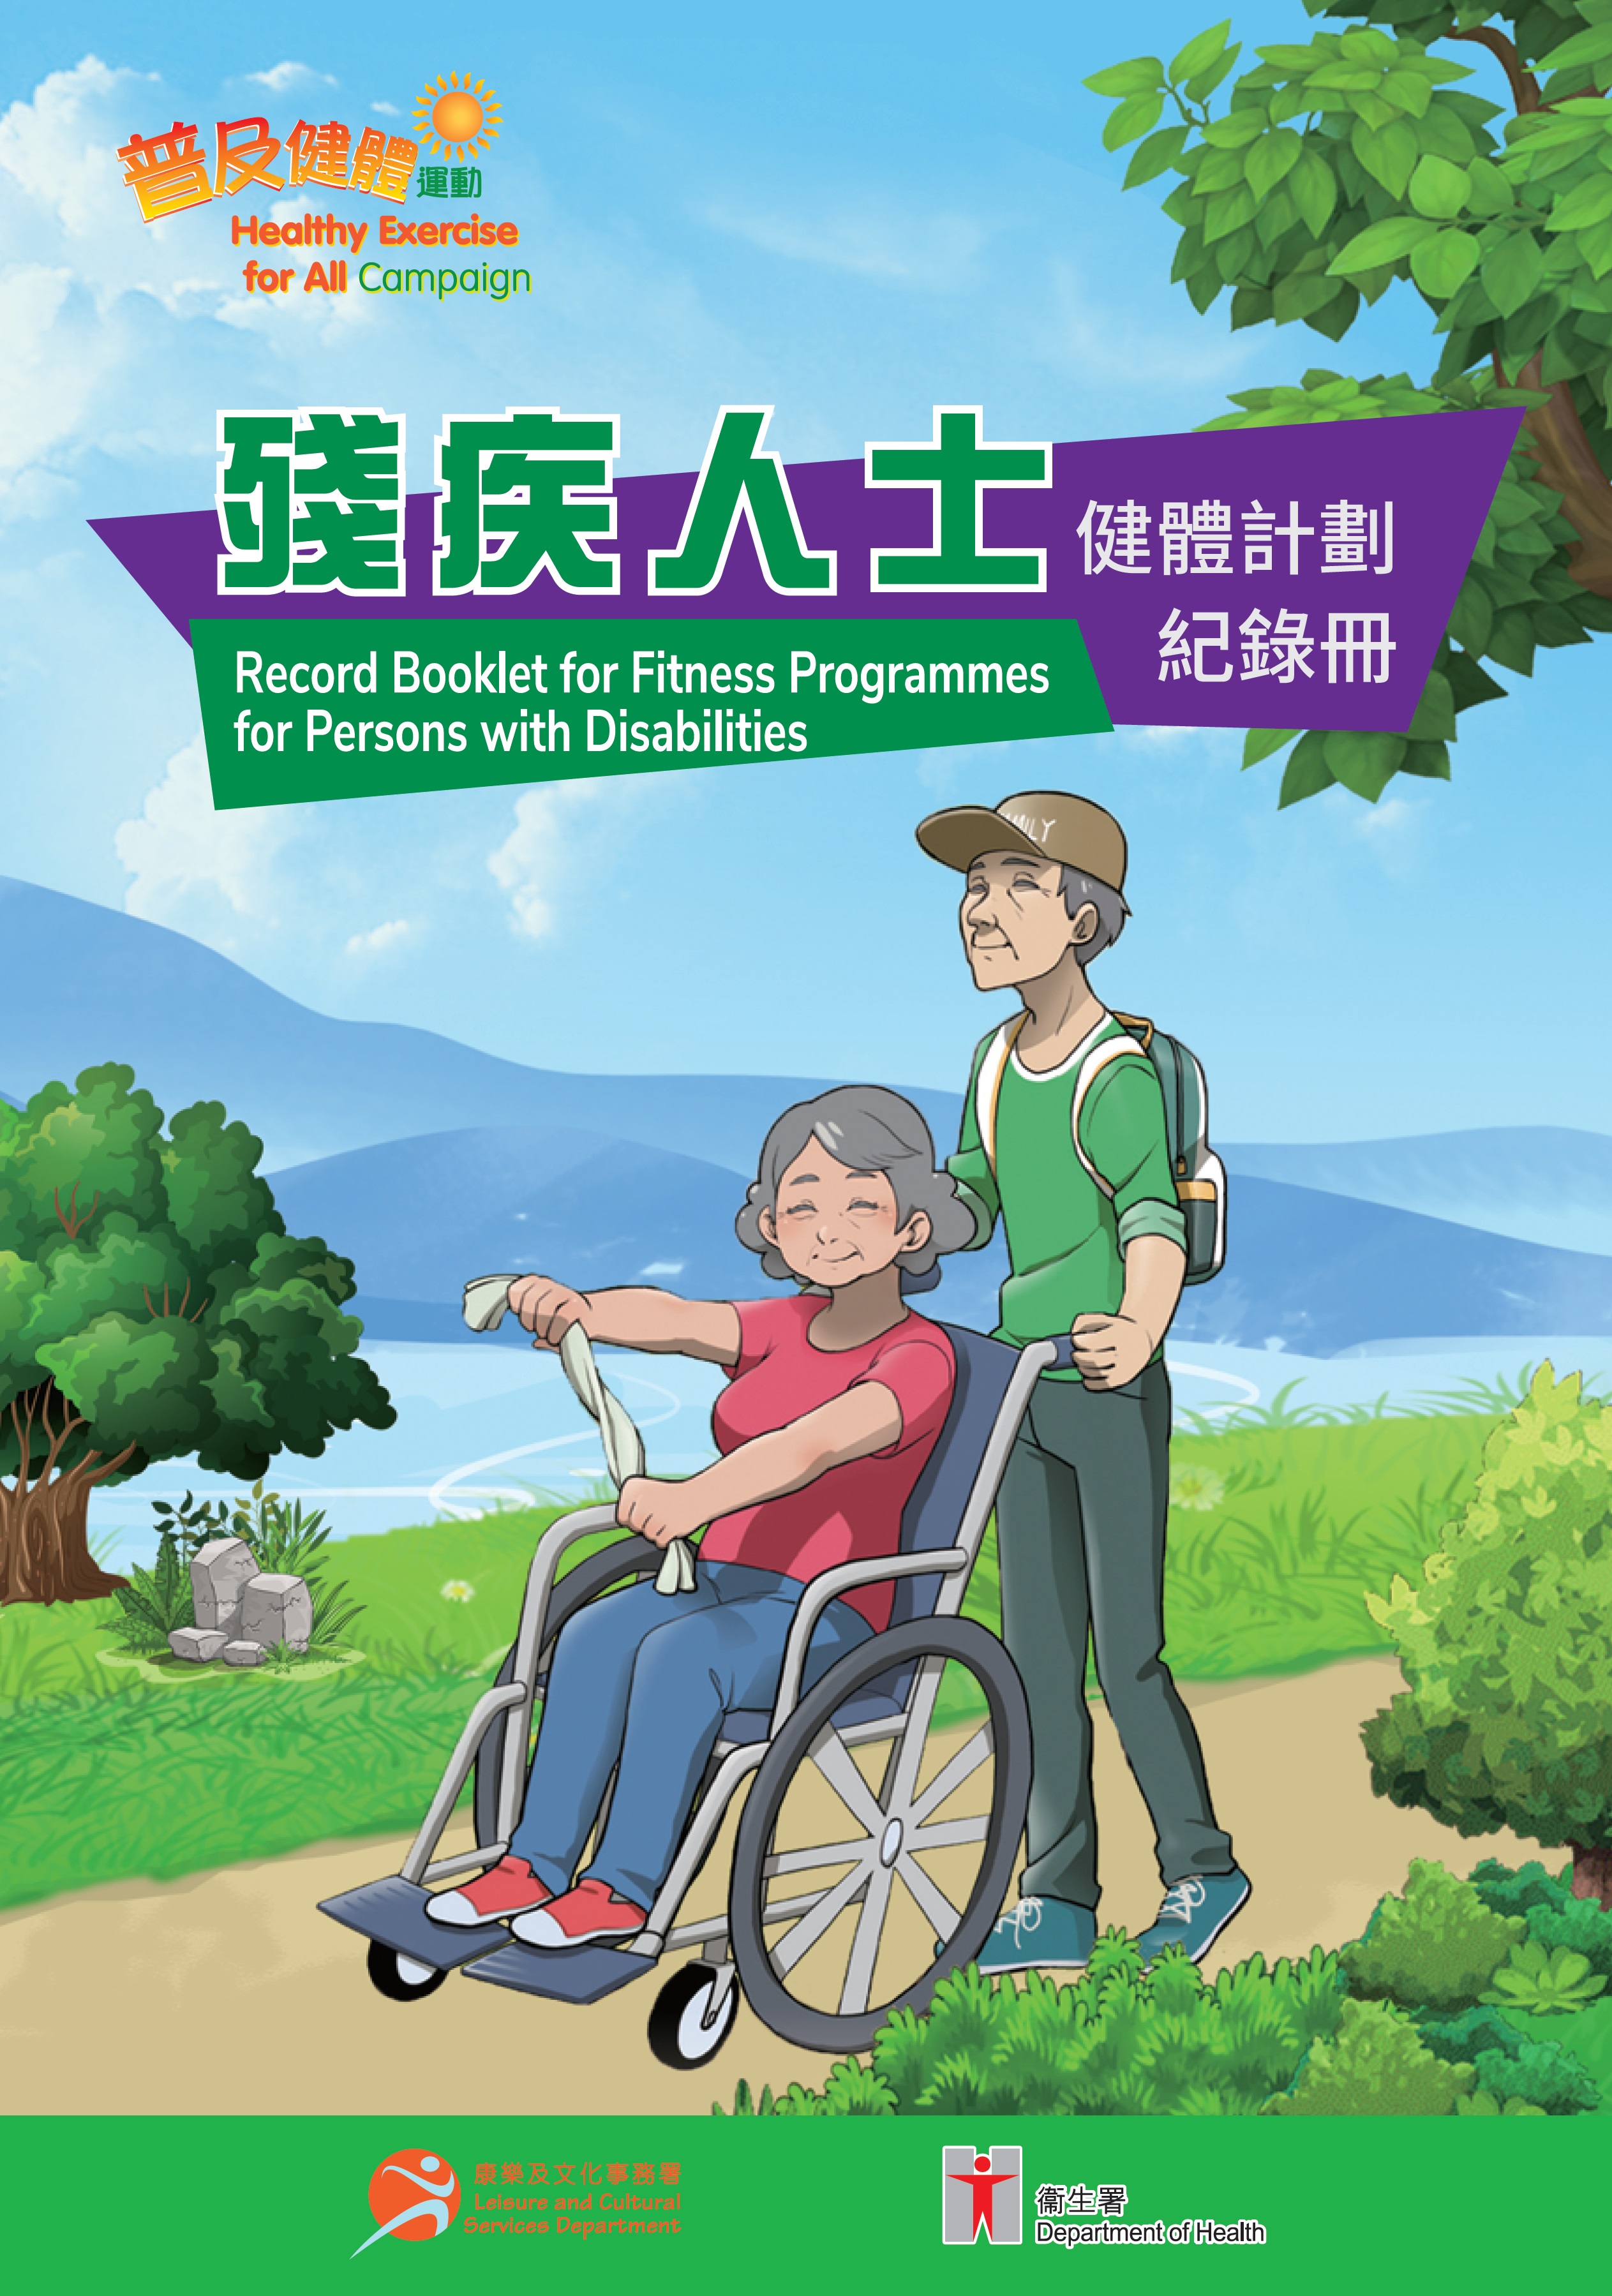 Record Booklet for Fitness Programmes for Persons with Disabilities